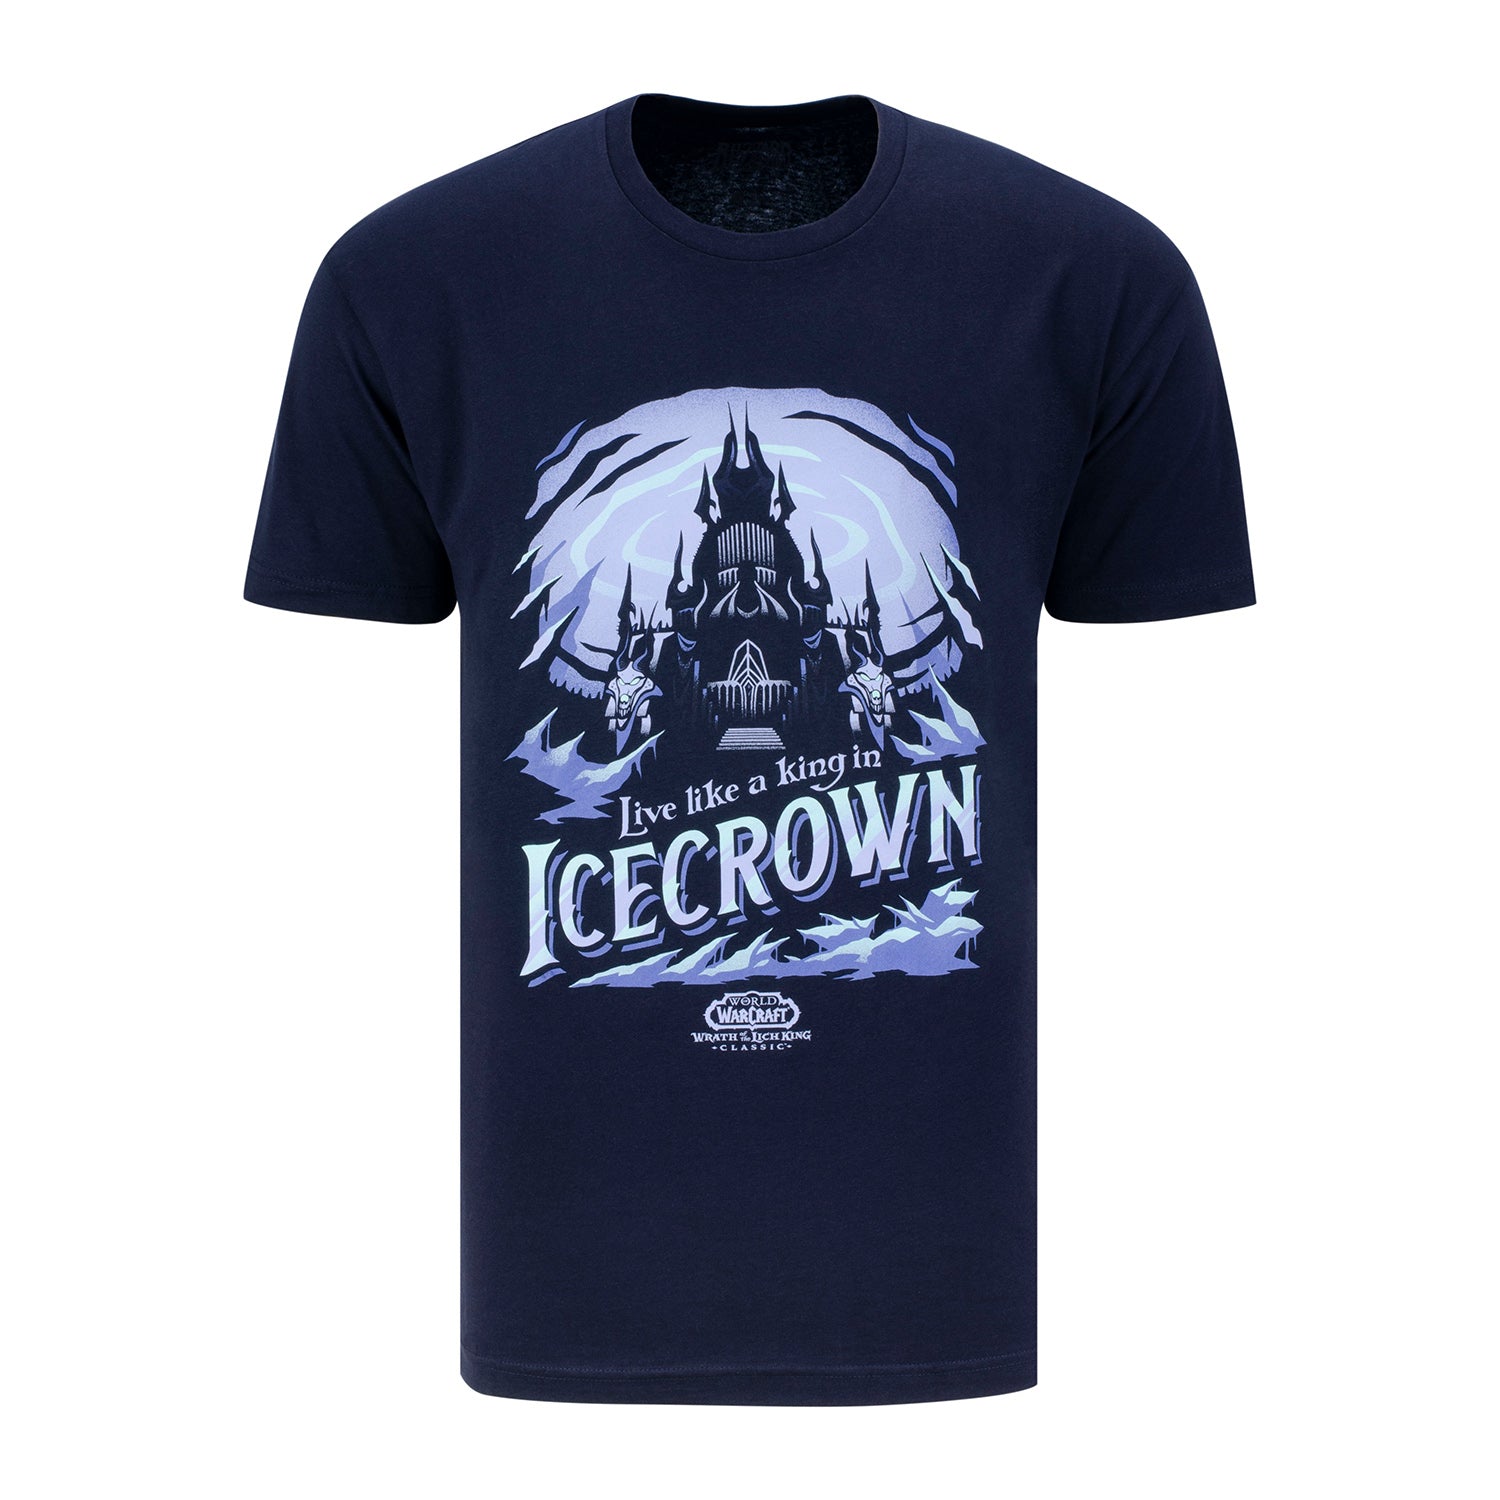 World of Warcraft Lich King J!NX Blue Icecrown T-Shirt - Front View